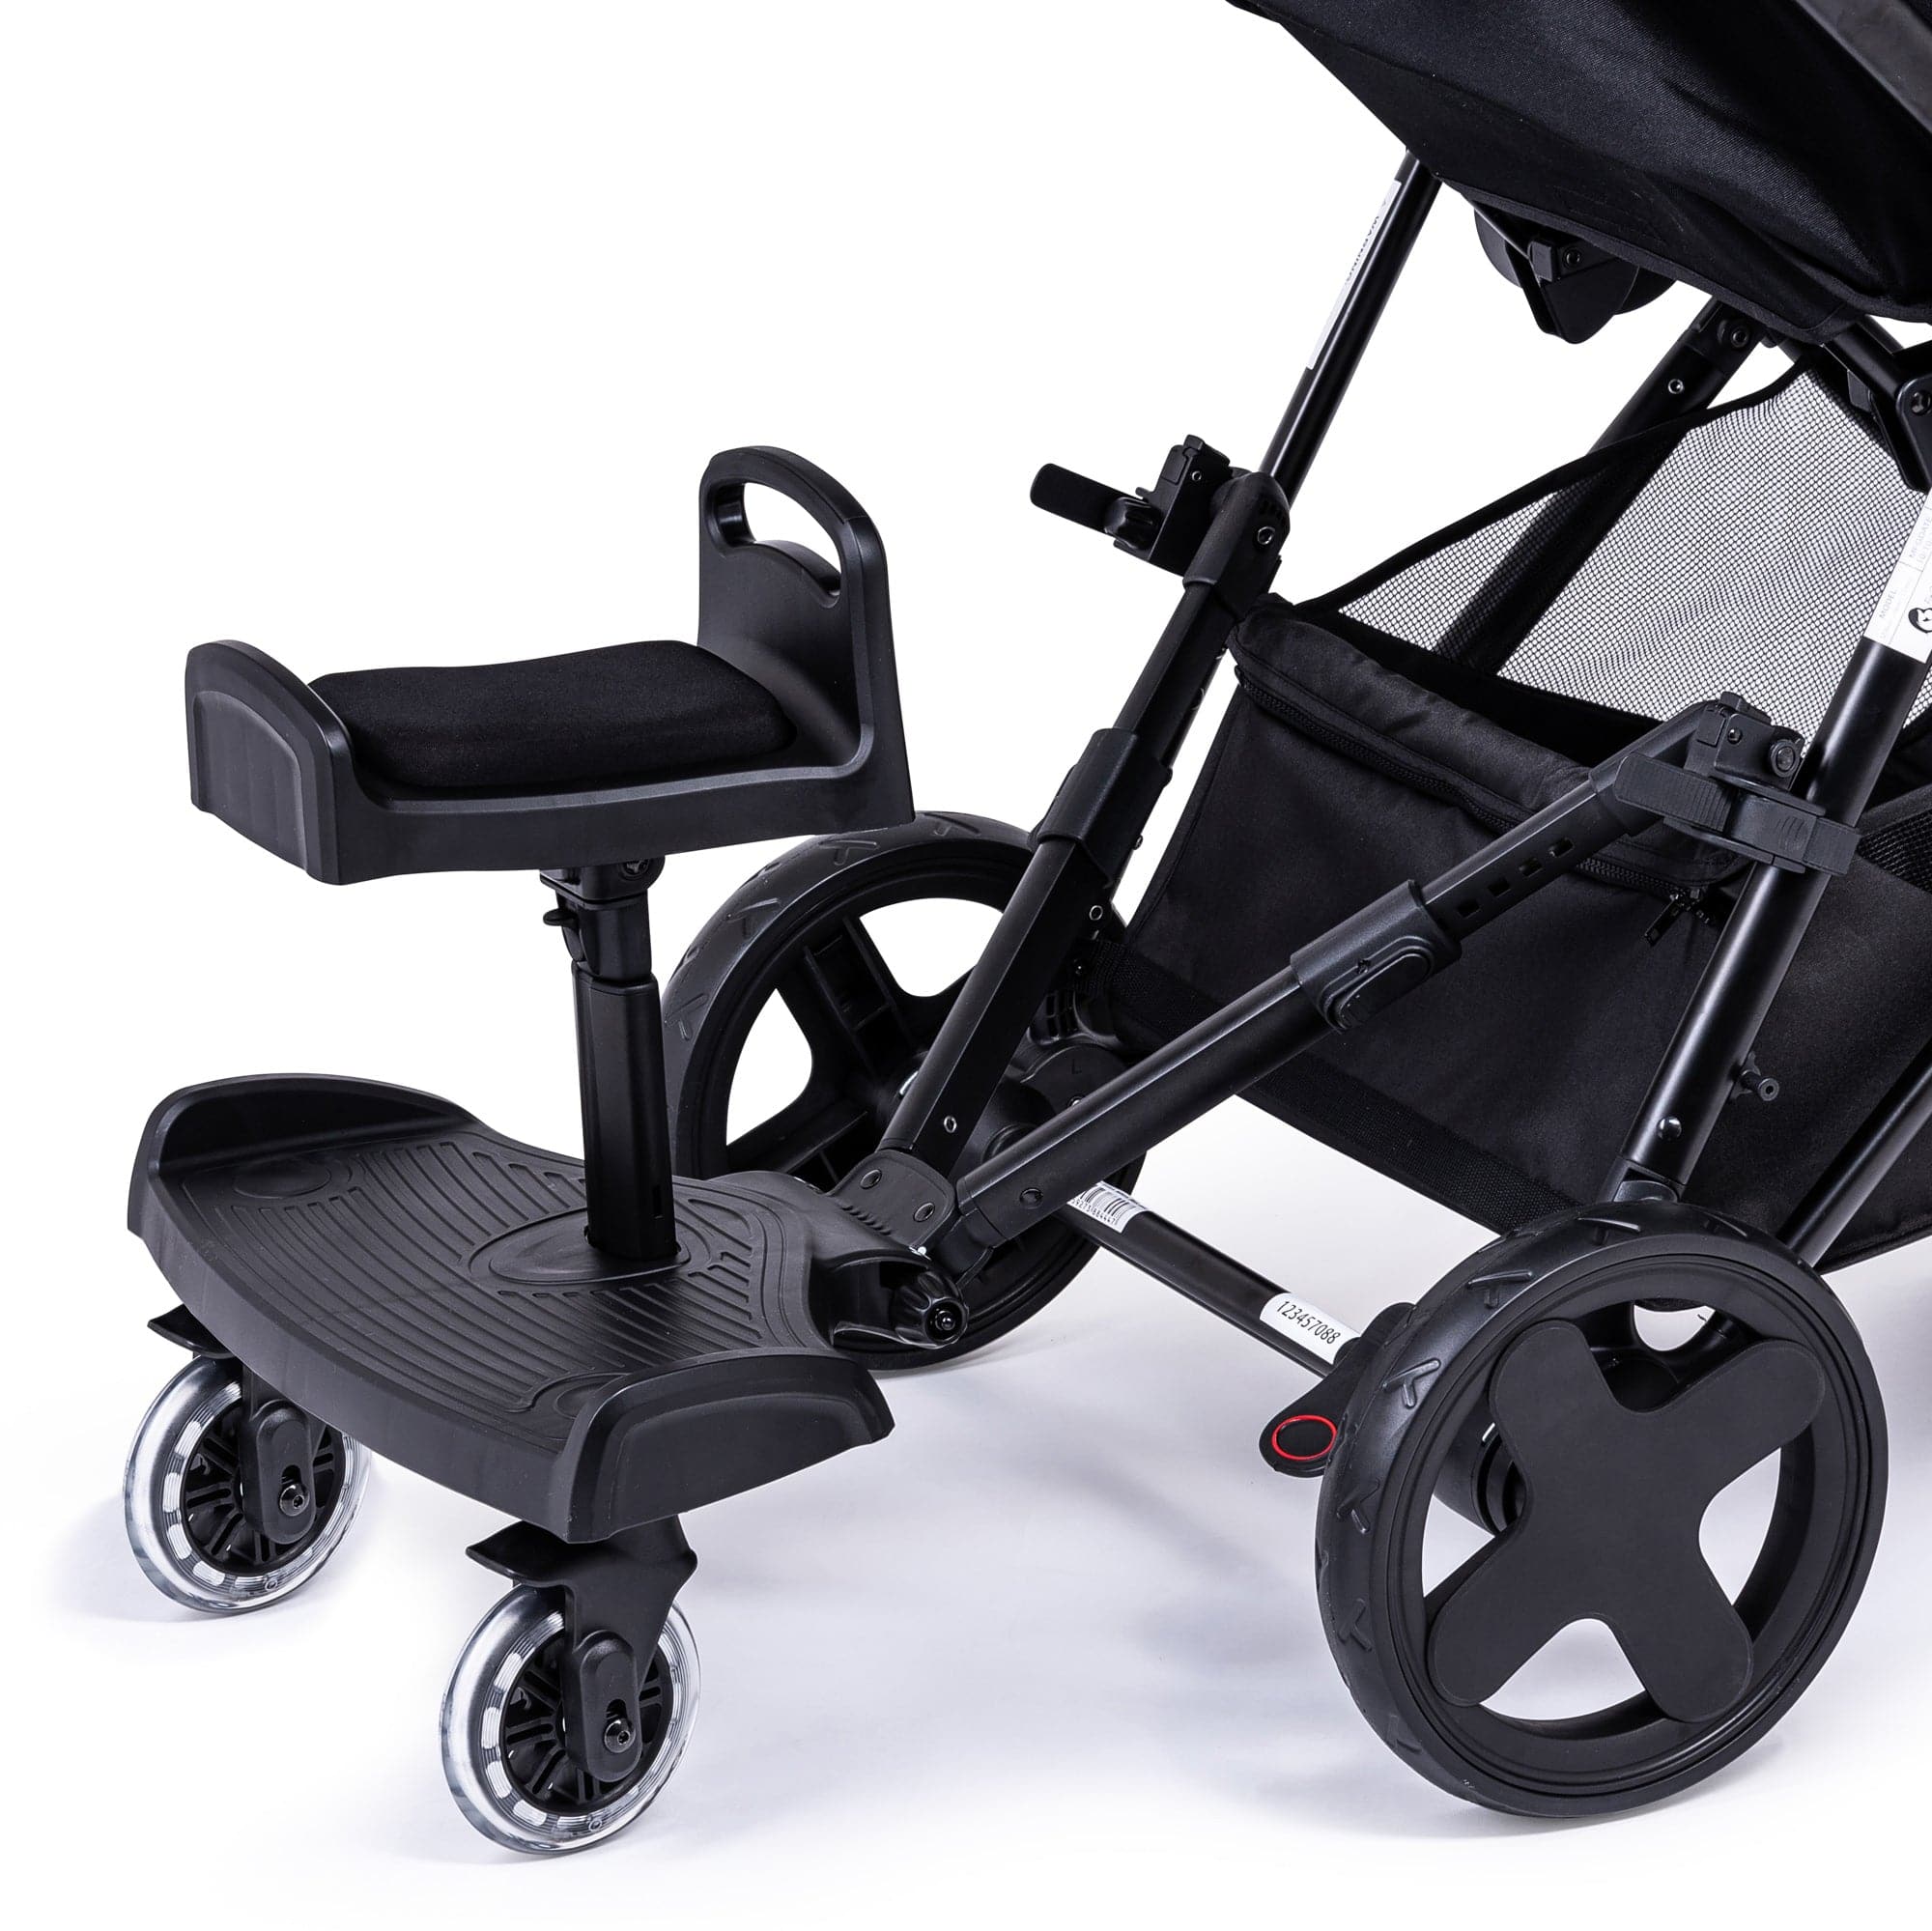 Ride On Board with Seat Compatible with Kiddicare - For Your Little One